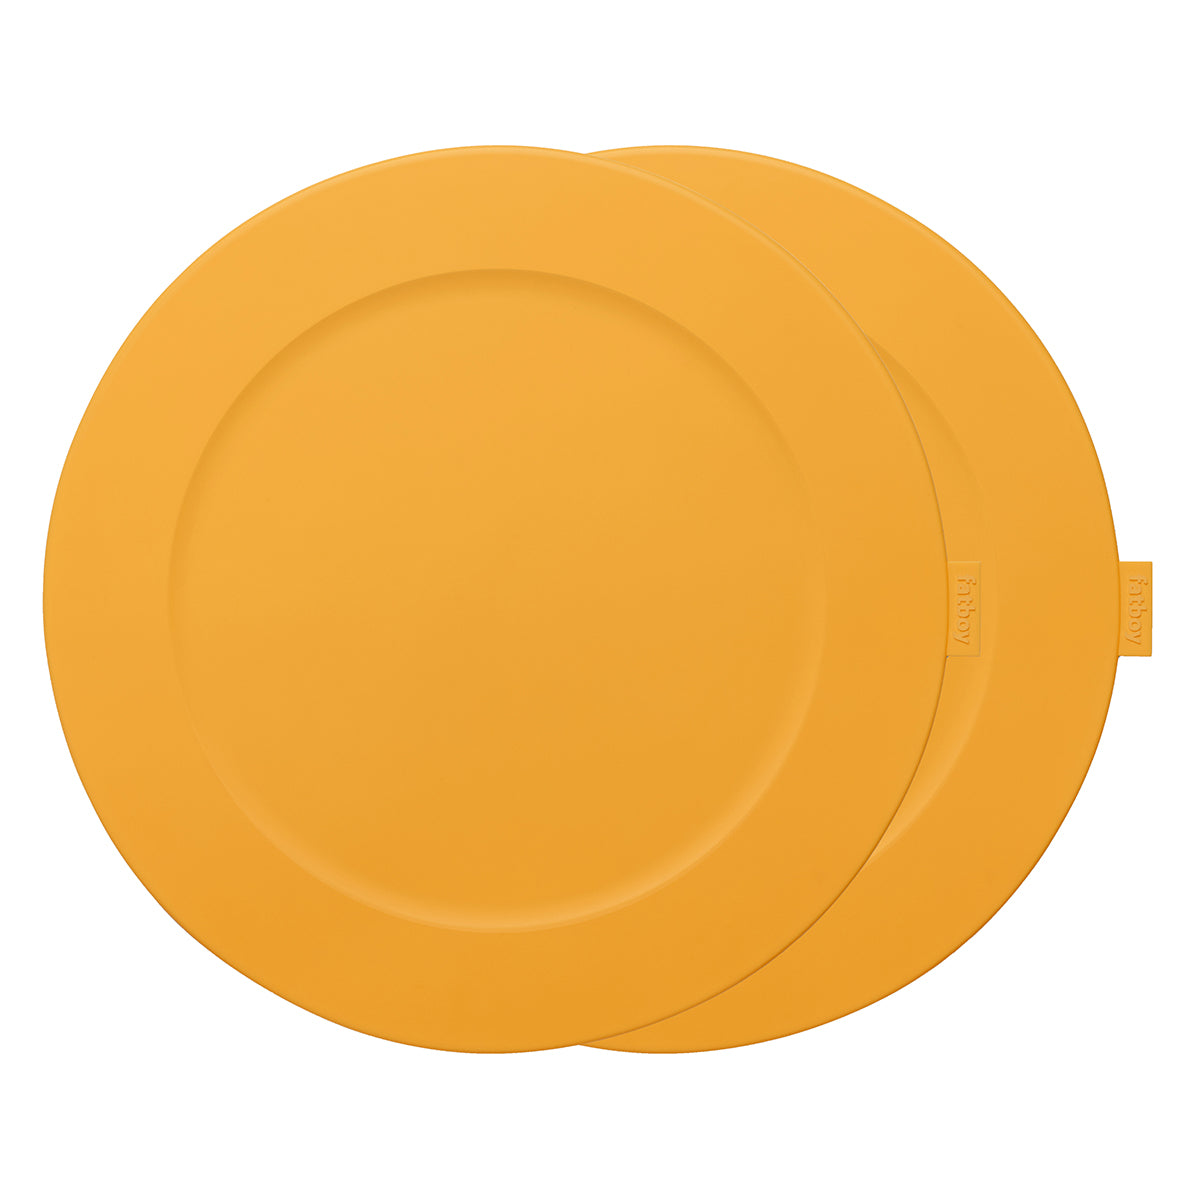 <transcy>Placemat Fatboy Place-we-met in different Colors</transcy>